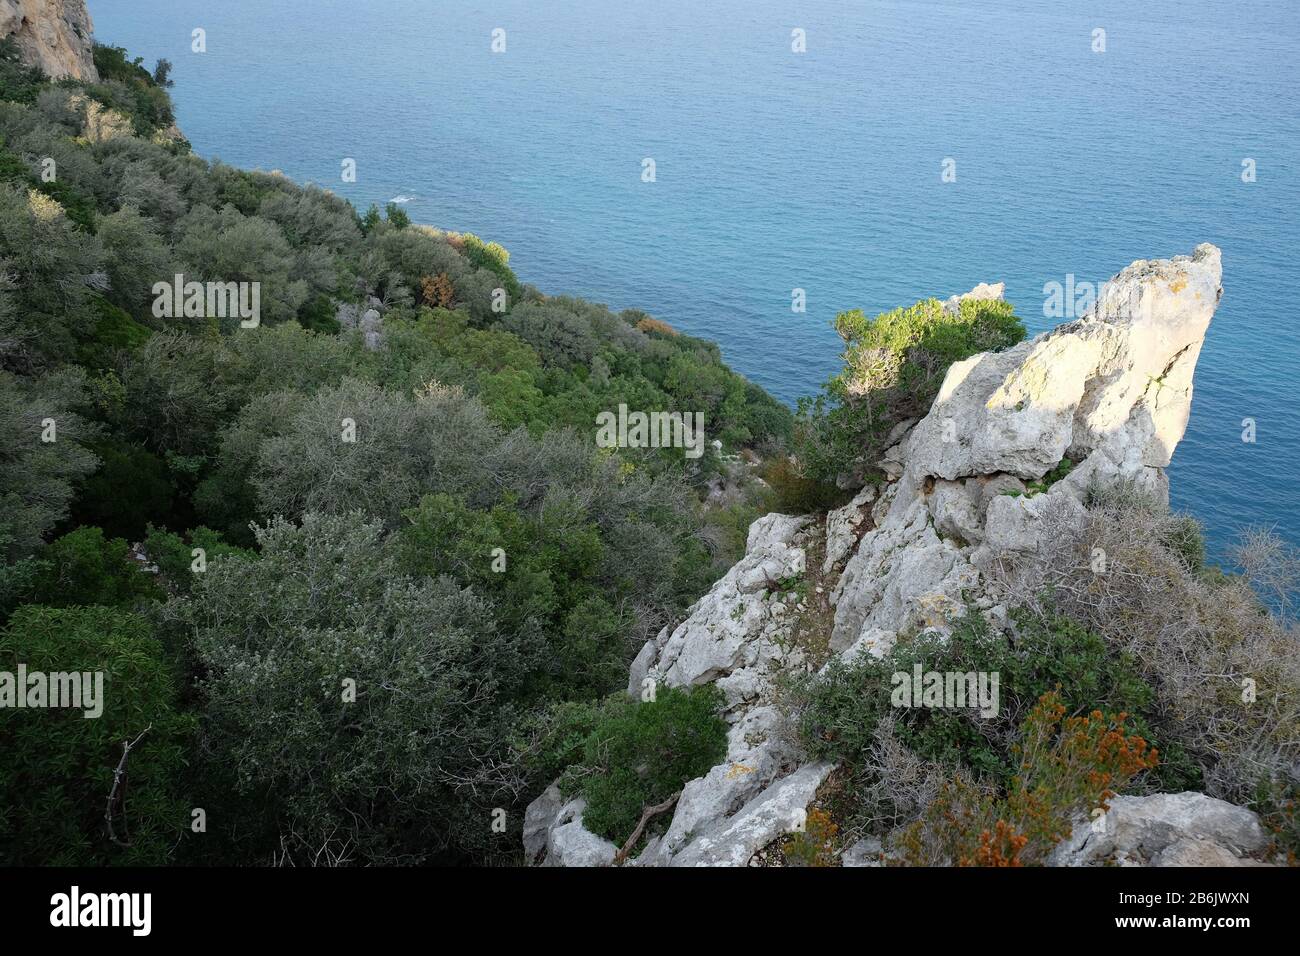 Landscape with sharp cliff in rocky shore covered with dense southern vegetation and wonderful clean turquoise water Mediterranean sea far below Stock Photo